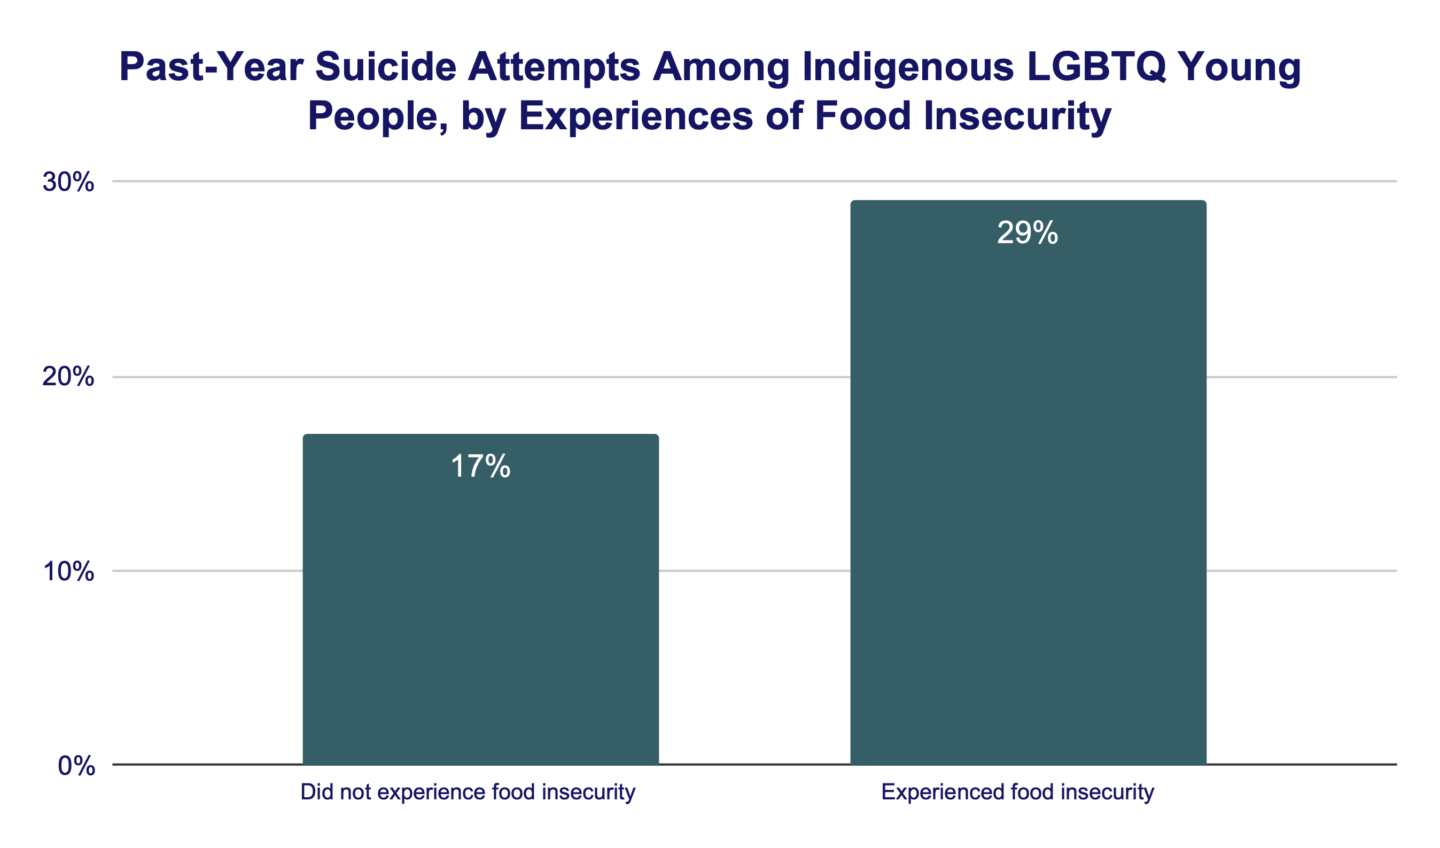 Past-Year Suicide Attempts Among Indigenous LGBTQ Young People by Experience of Food Insecurity